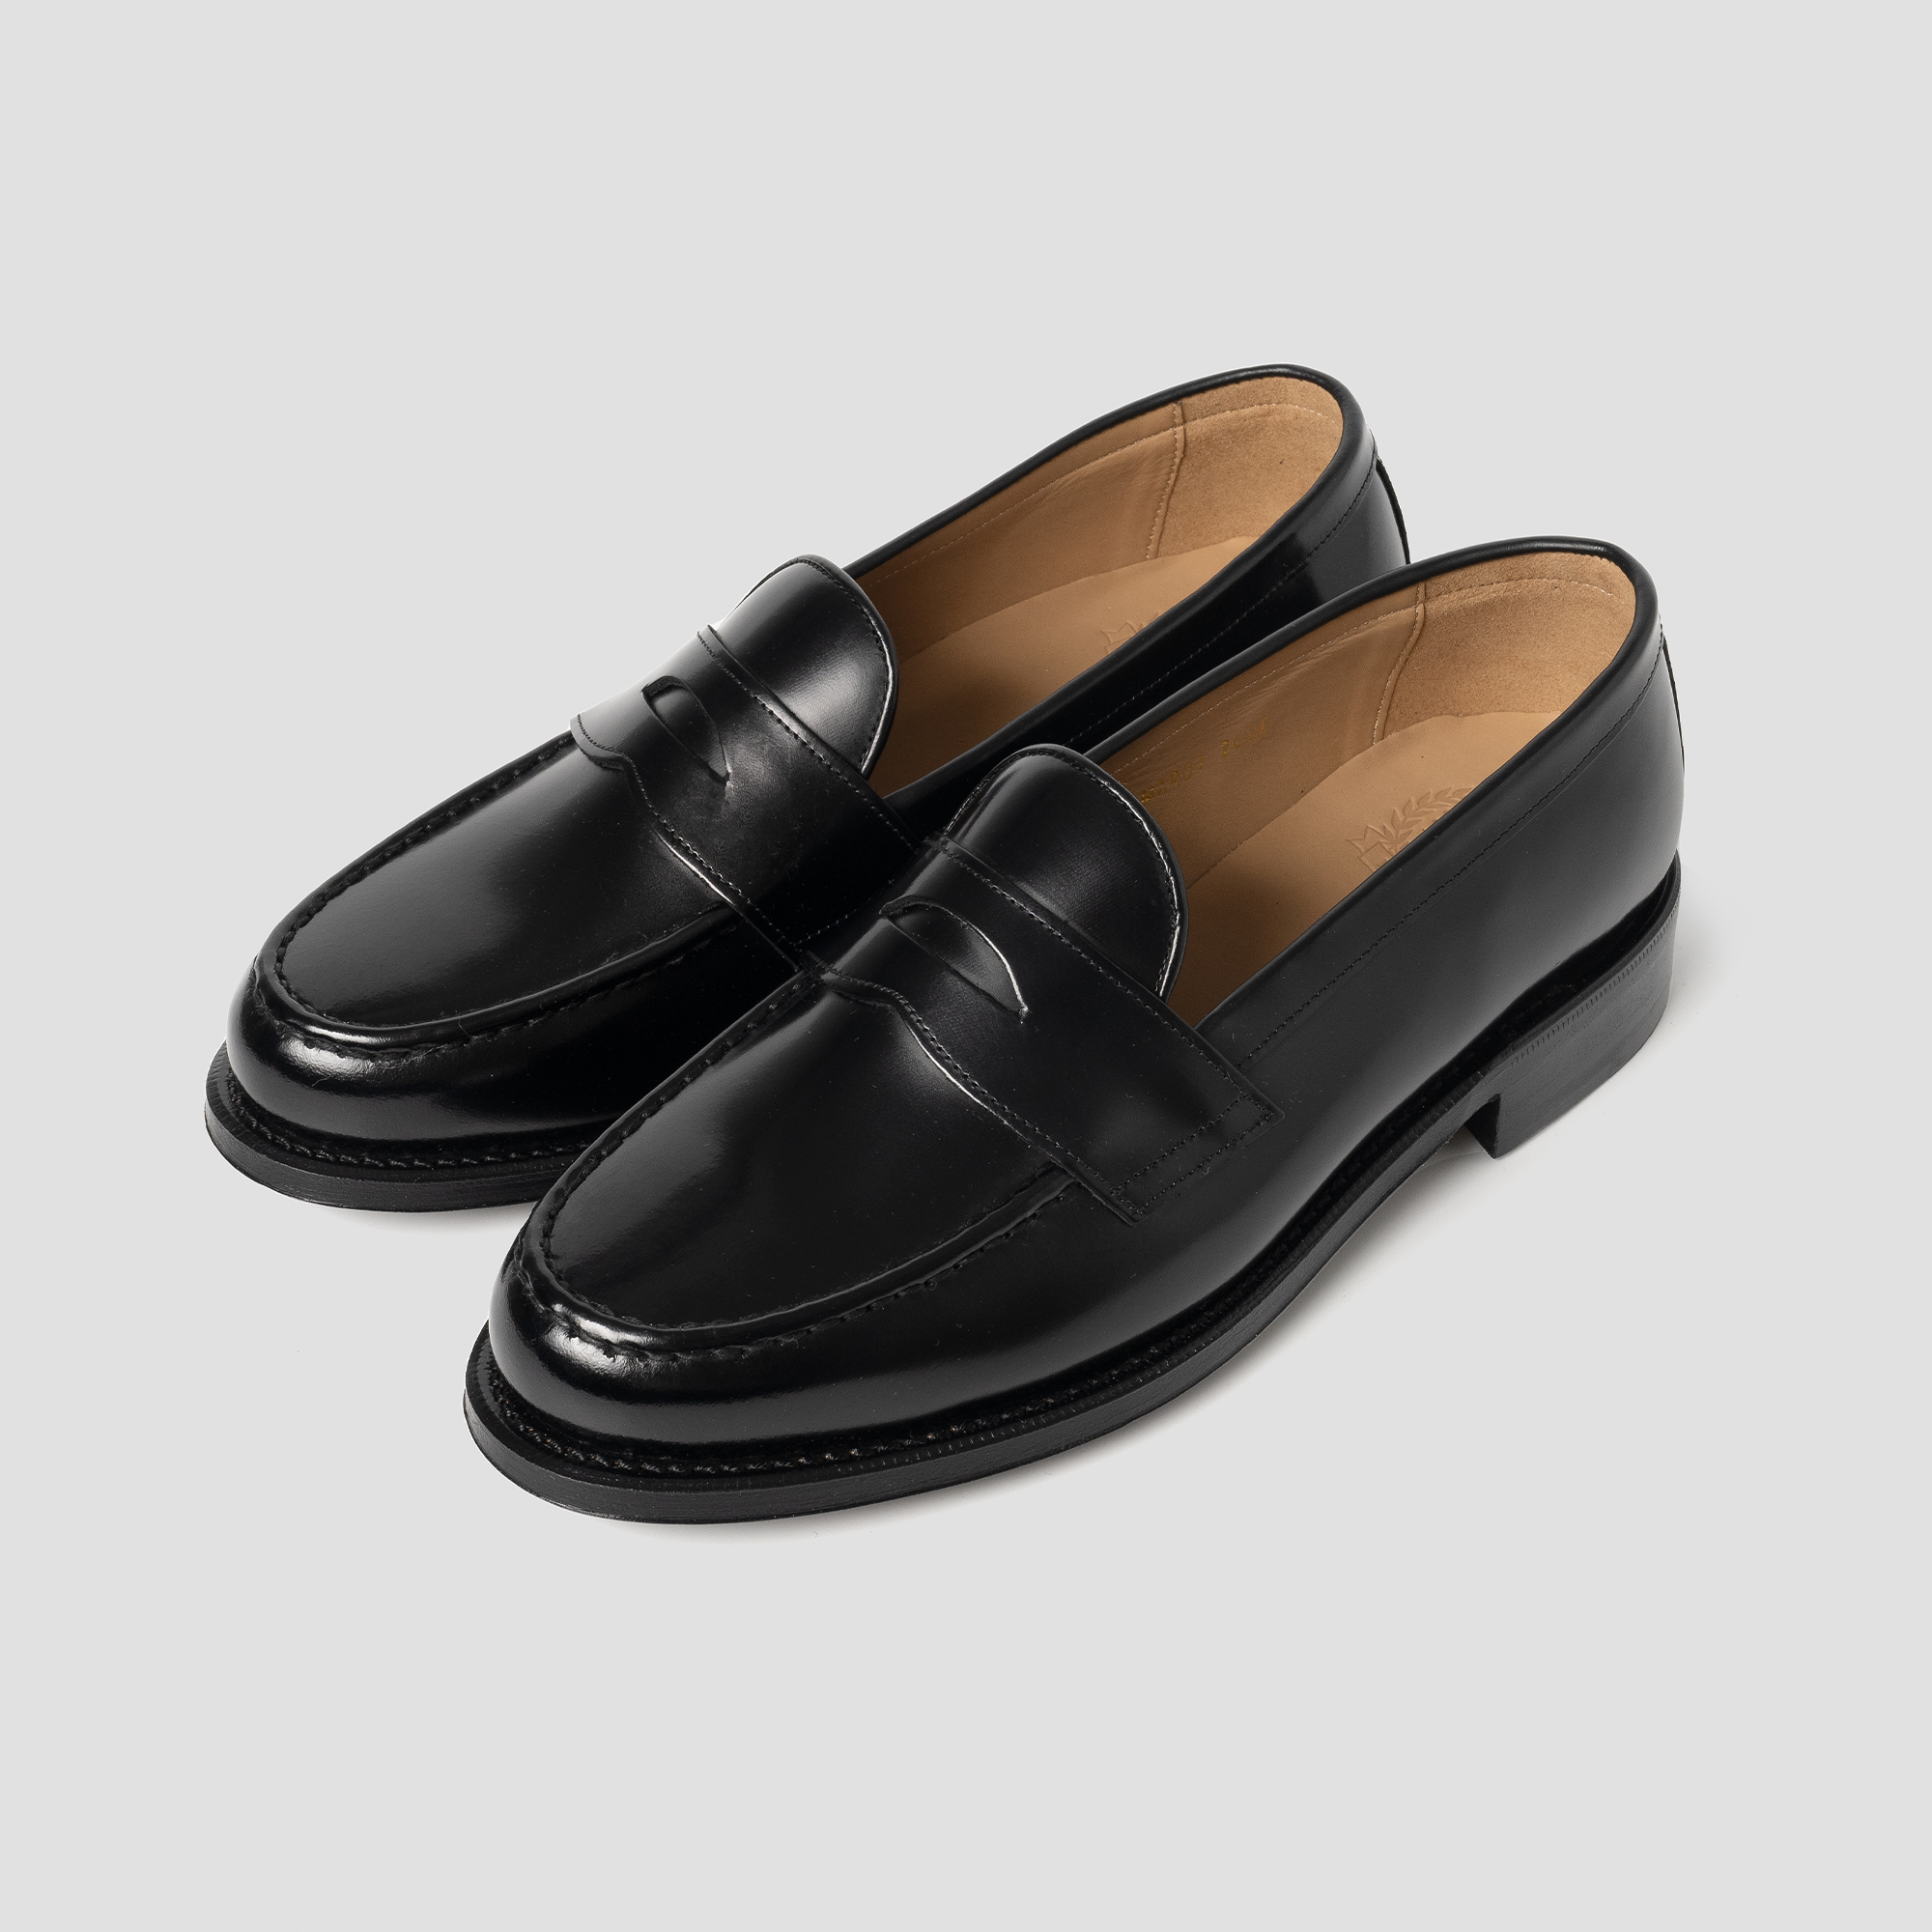 Goodyear Welted Penny Loafer [Black]미라보로